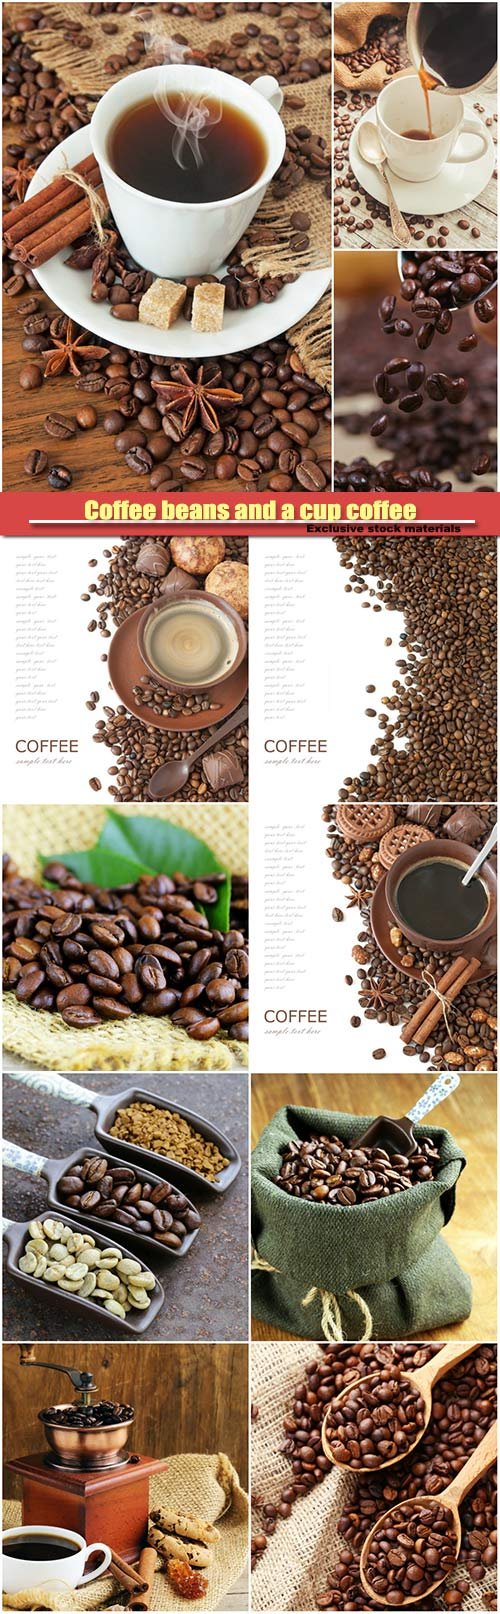 Coffee beans and a cup of fragrant coffee